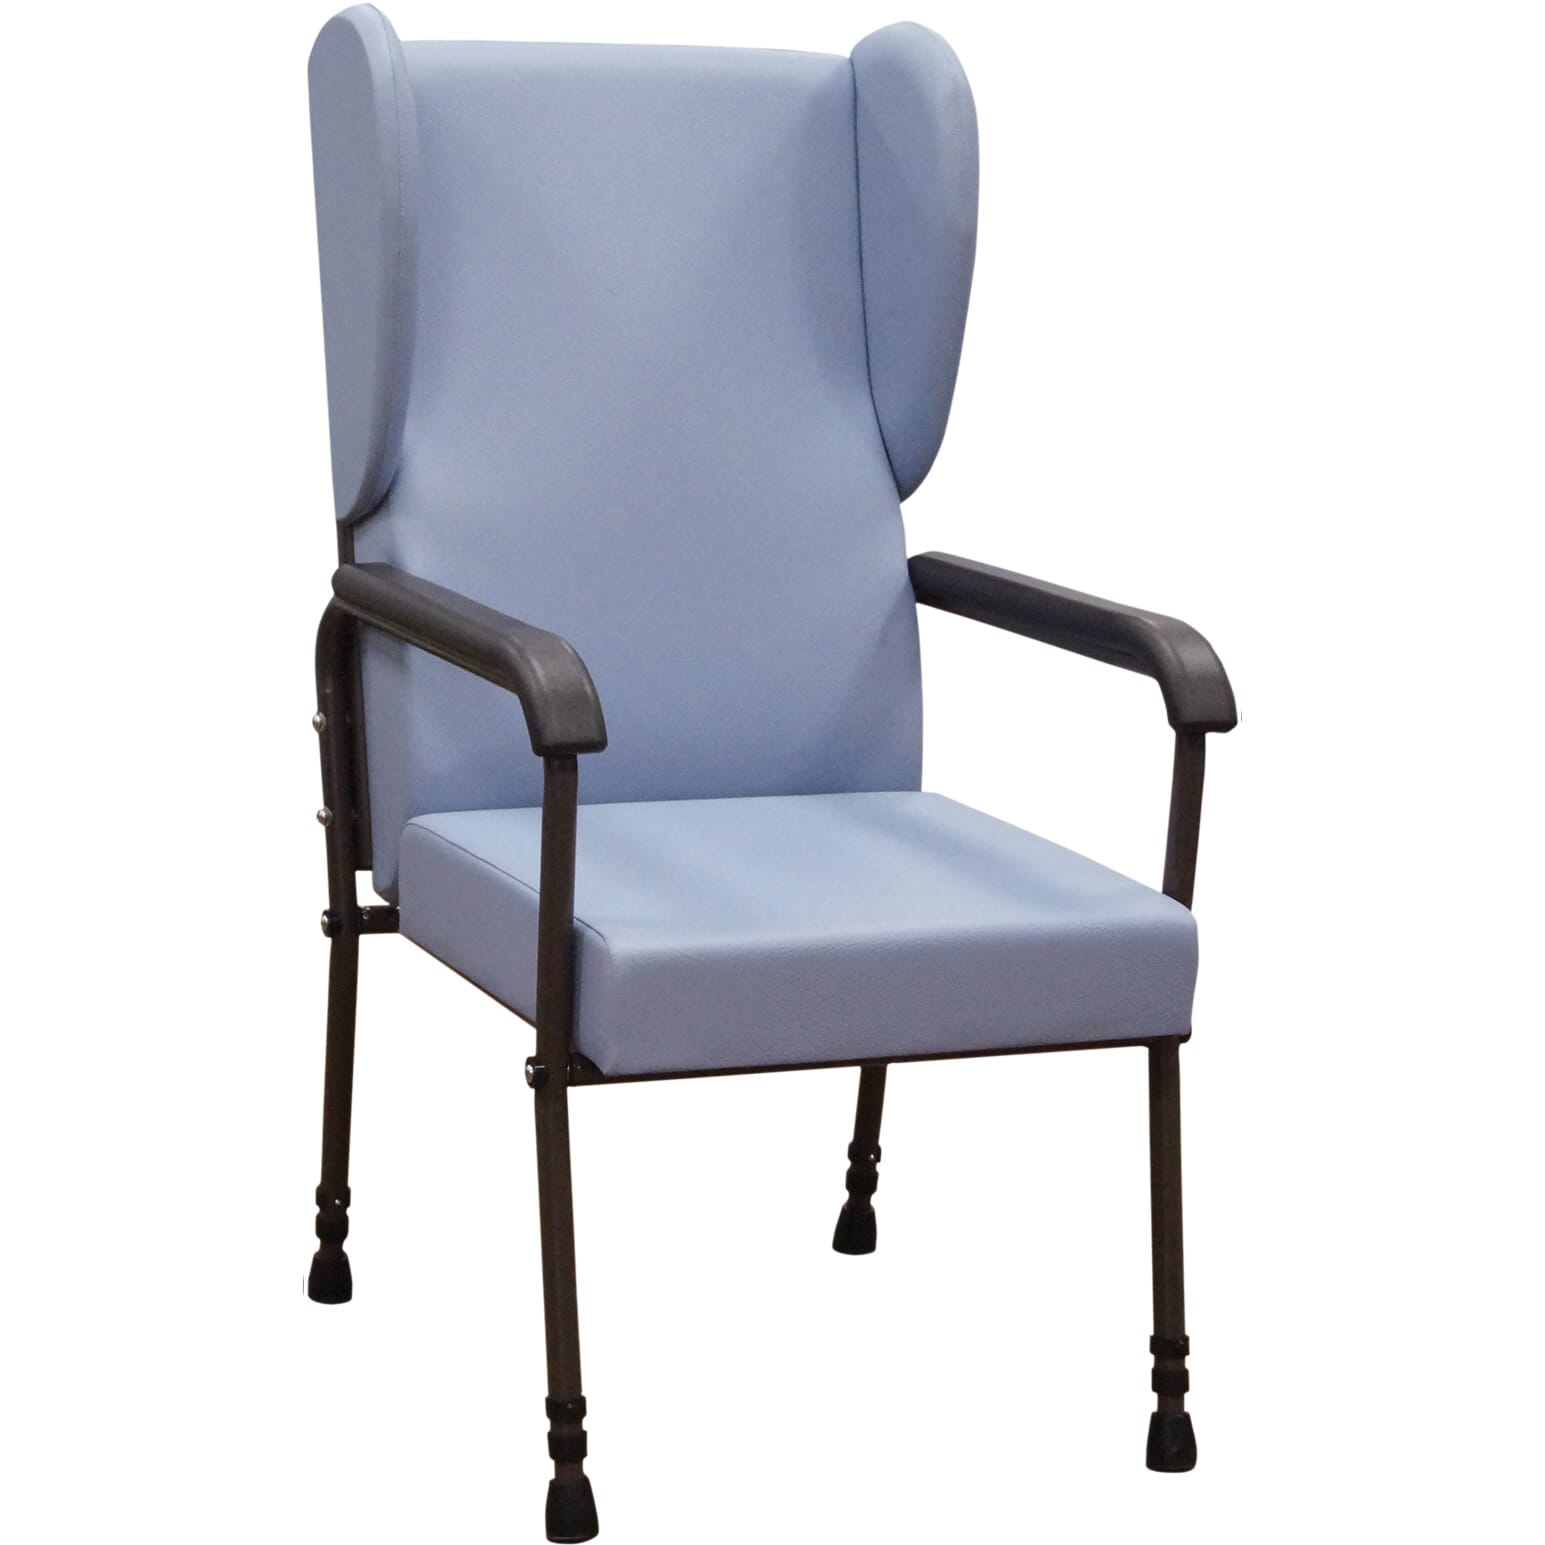 View Chelsfield Height Adjustable Chair Blue information